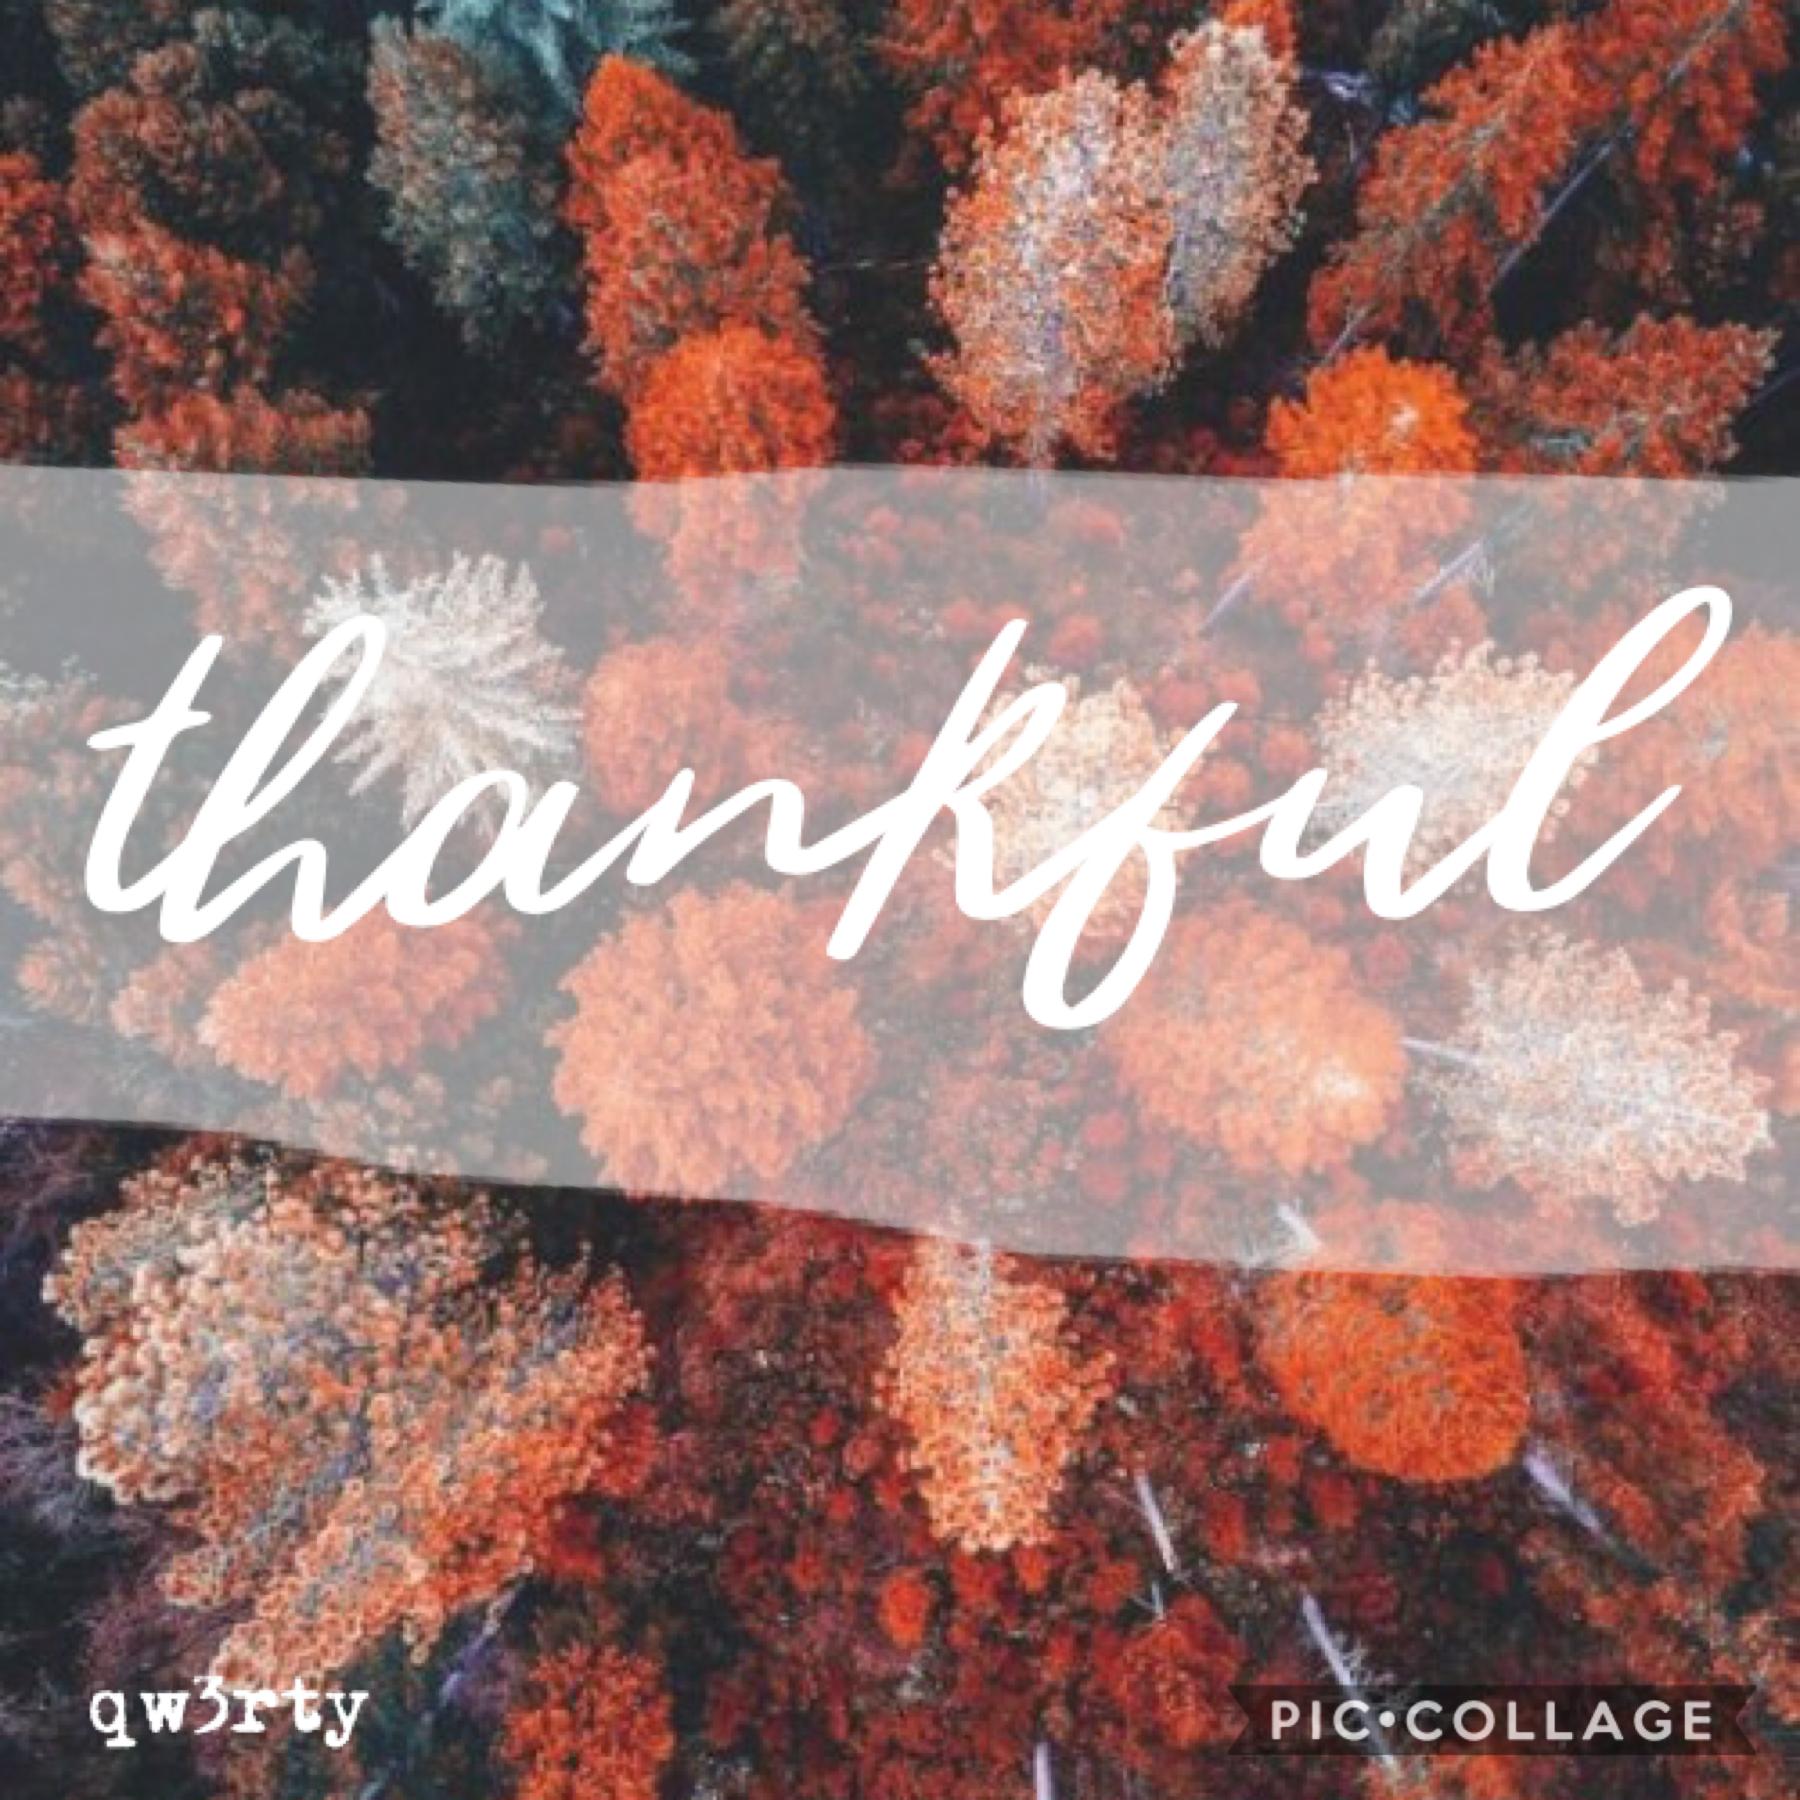 Tap
Happy thanksgiving y’all!
We all have so much to be thankful for, I can’t fit it all here! It’s been so looong, I’ve been so busy with school and stuff😩 Leeli